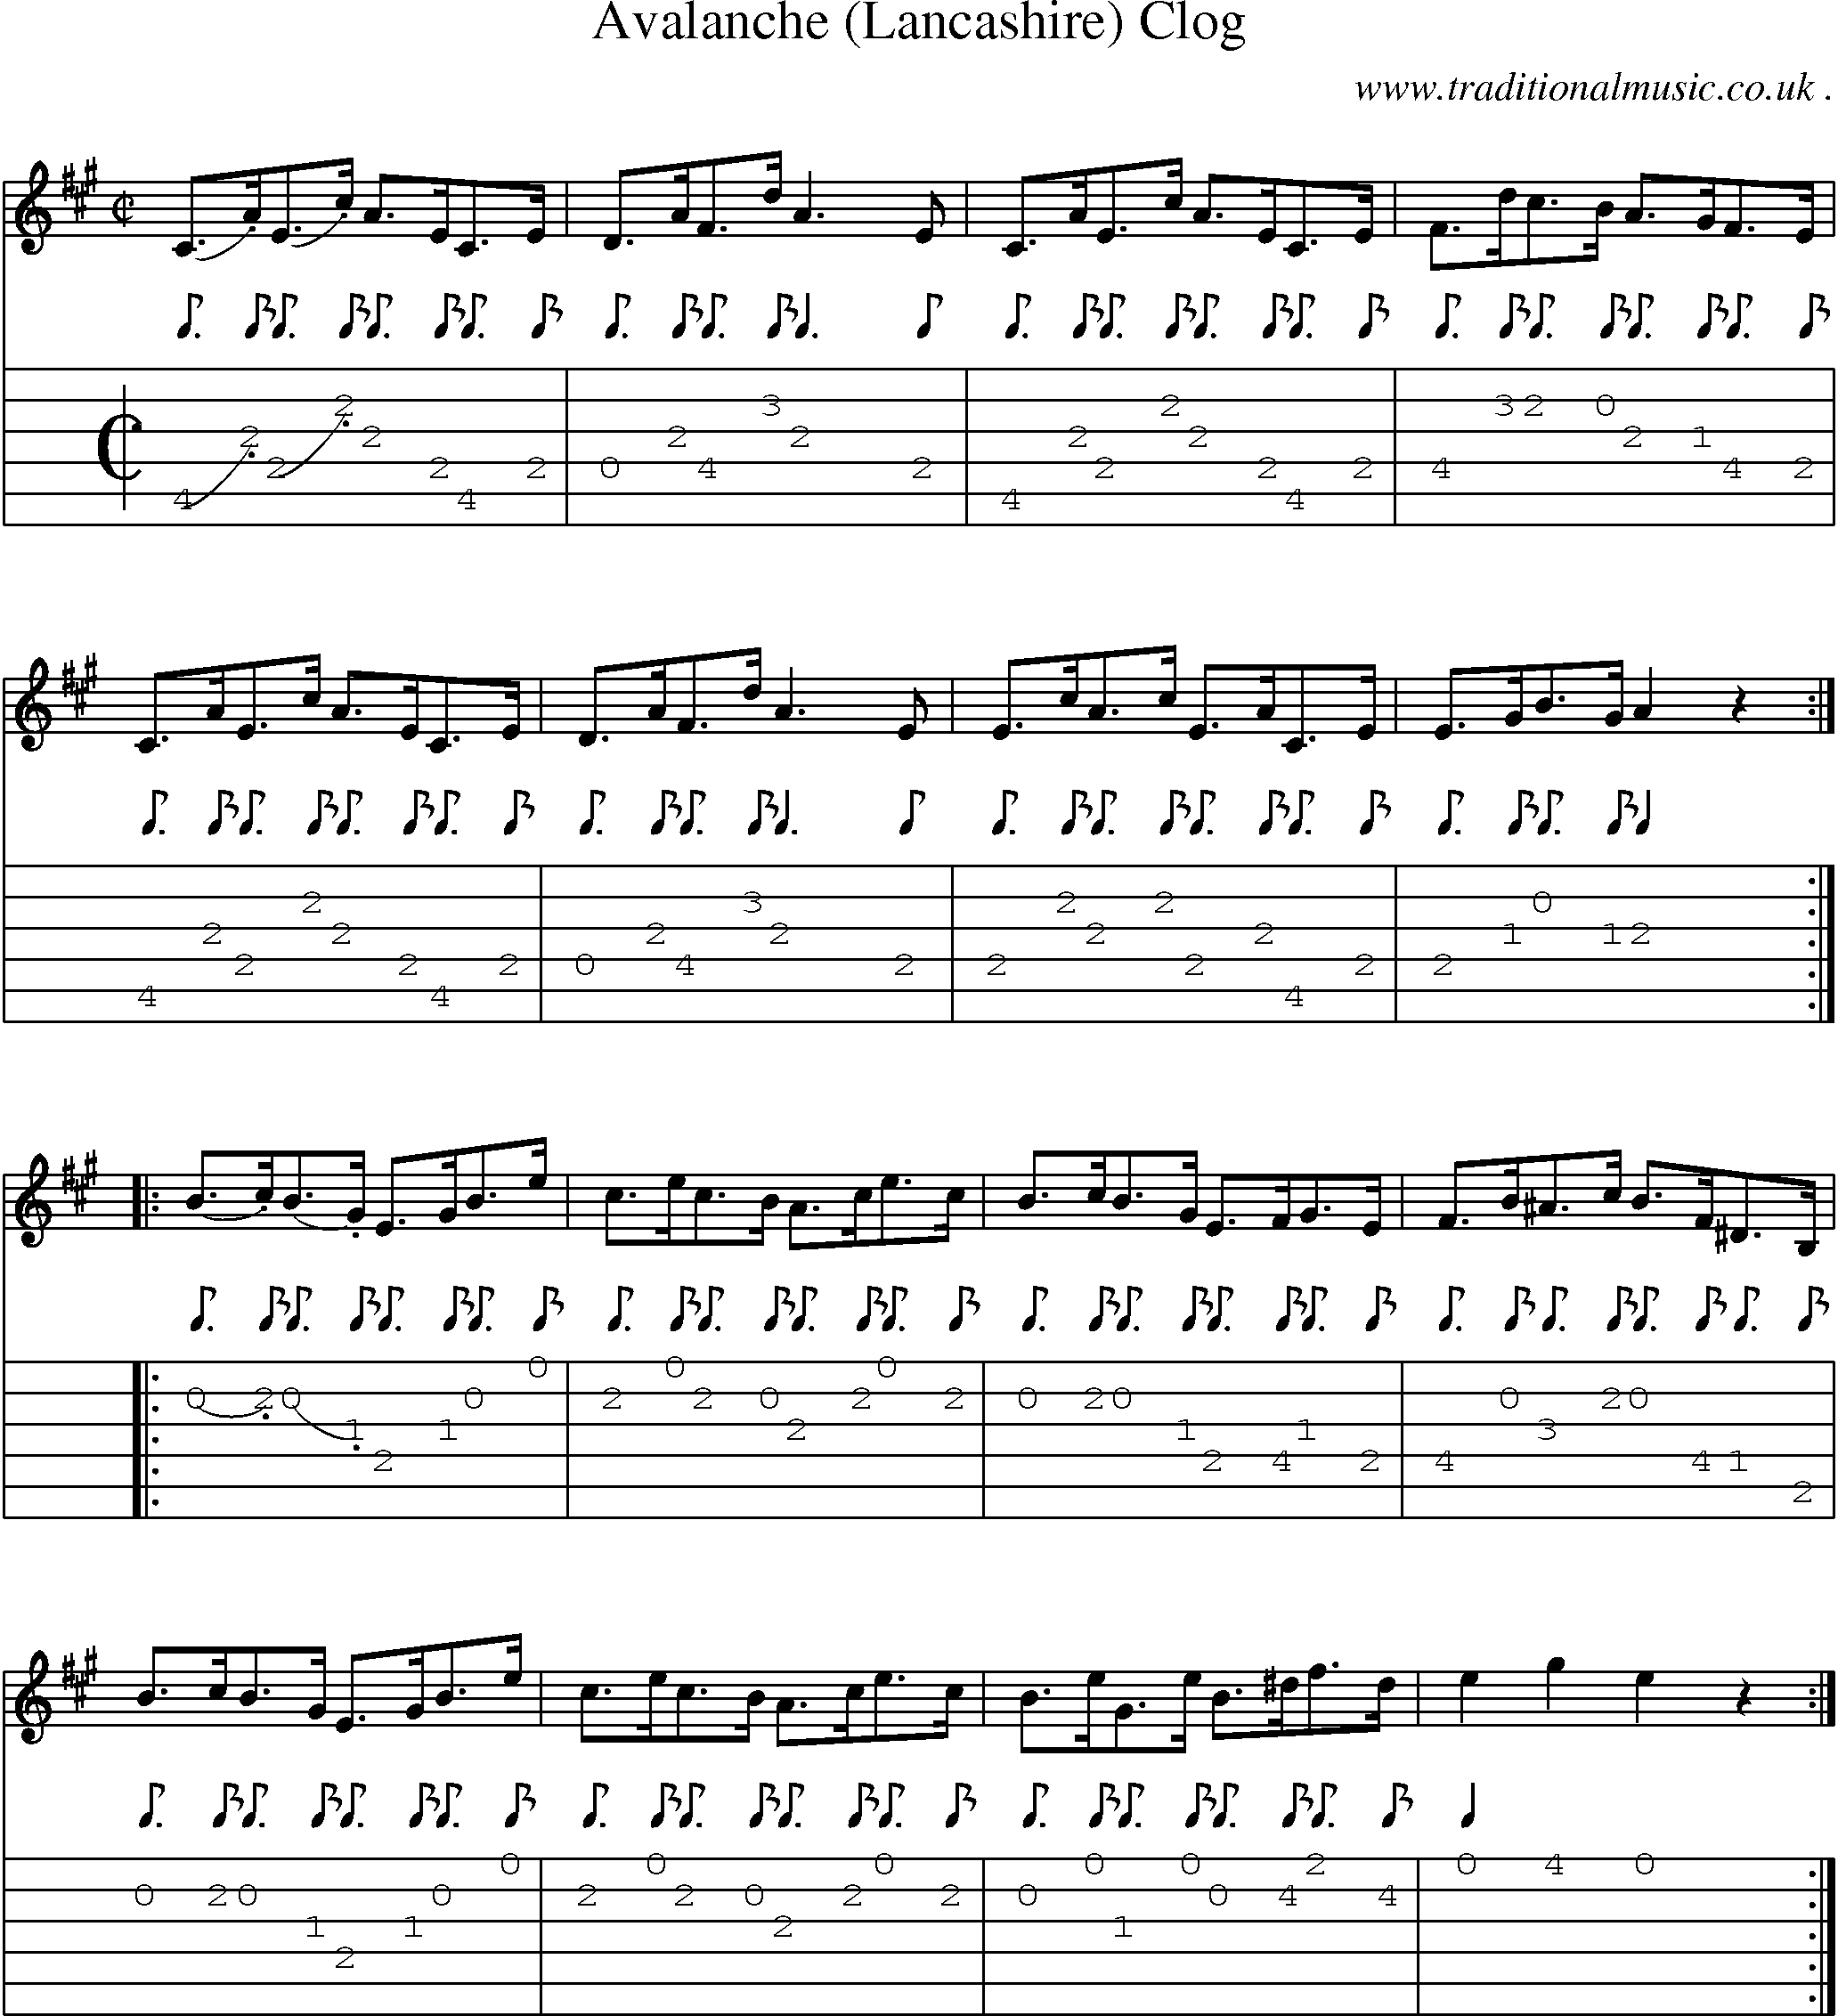 Sheet-Music and Guitar Tabs for Avalanche (lancashire) Clog